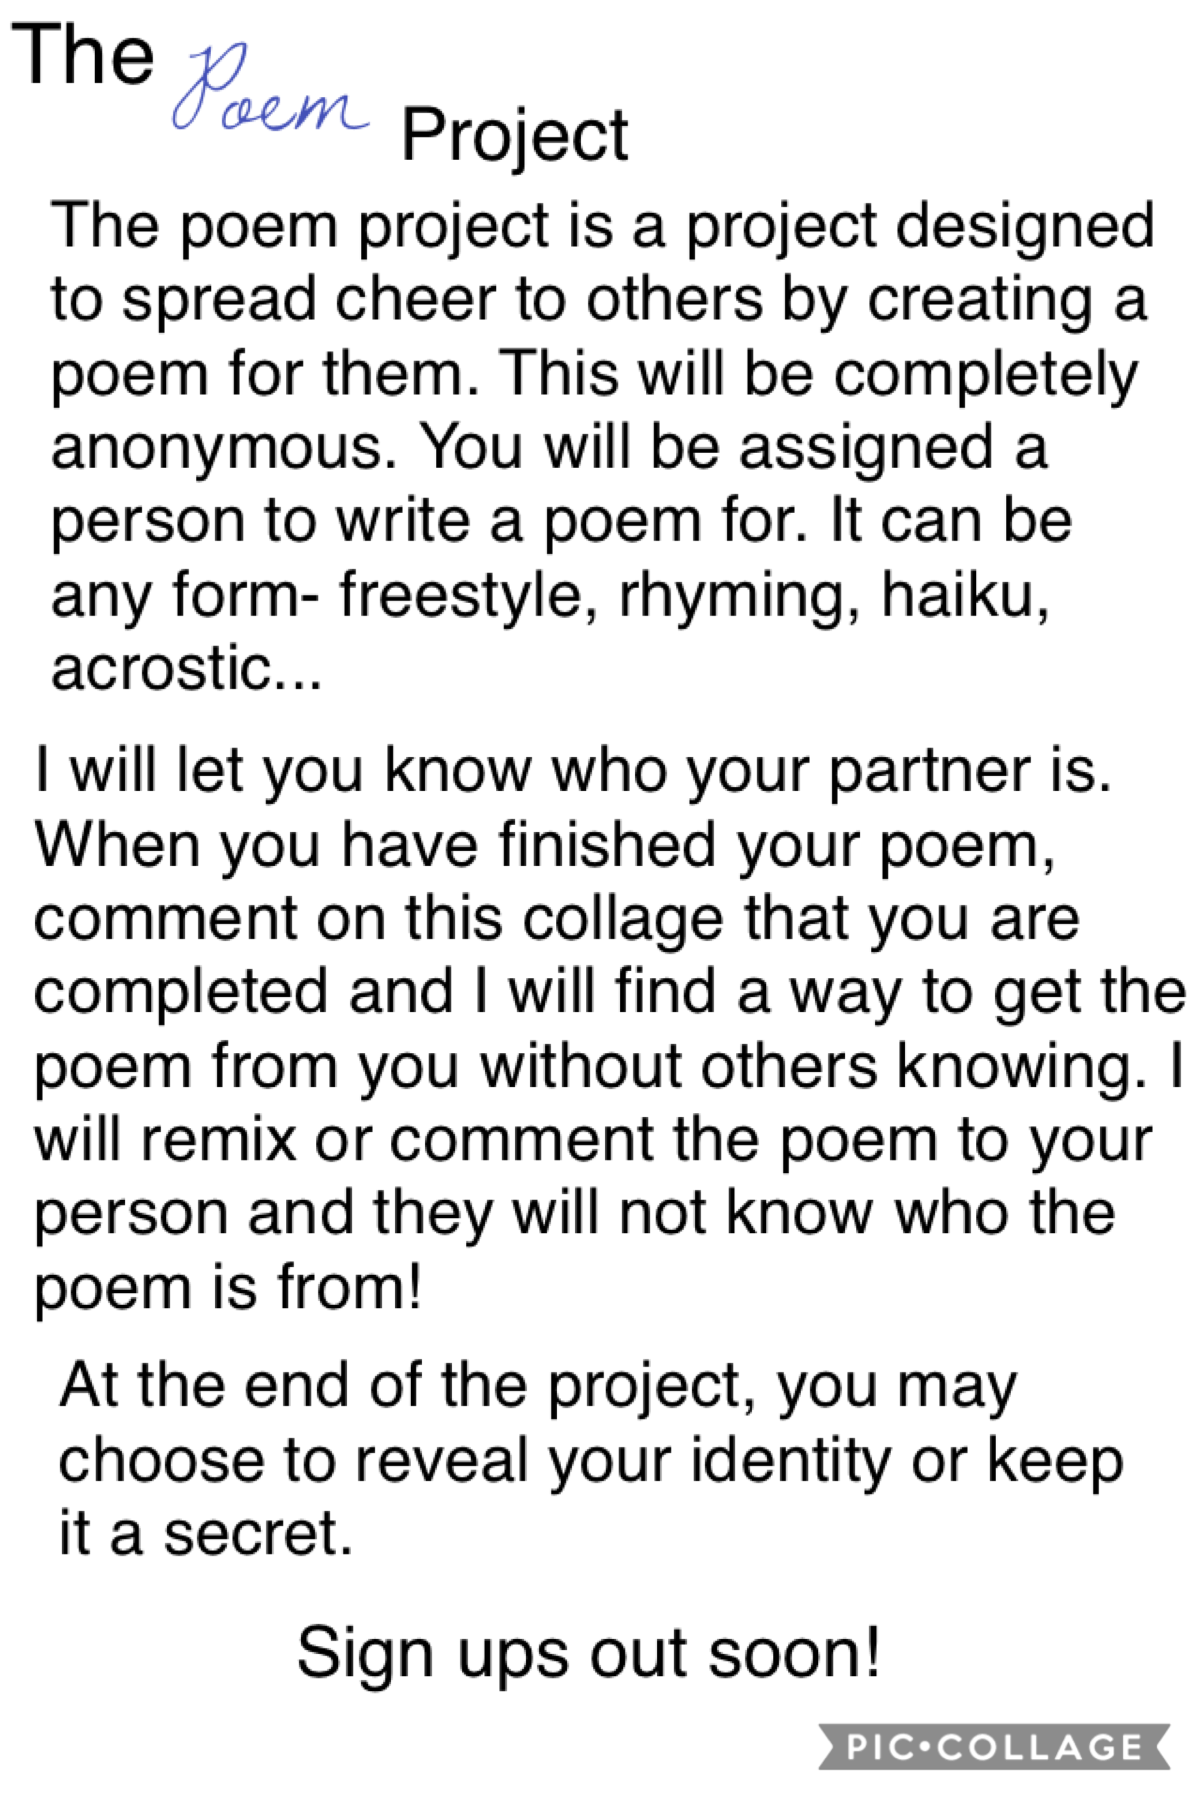 The poem project!